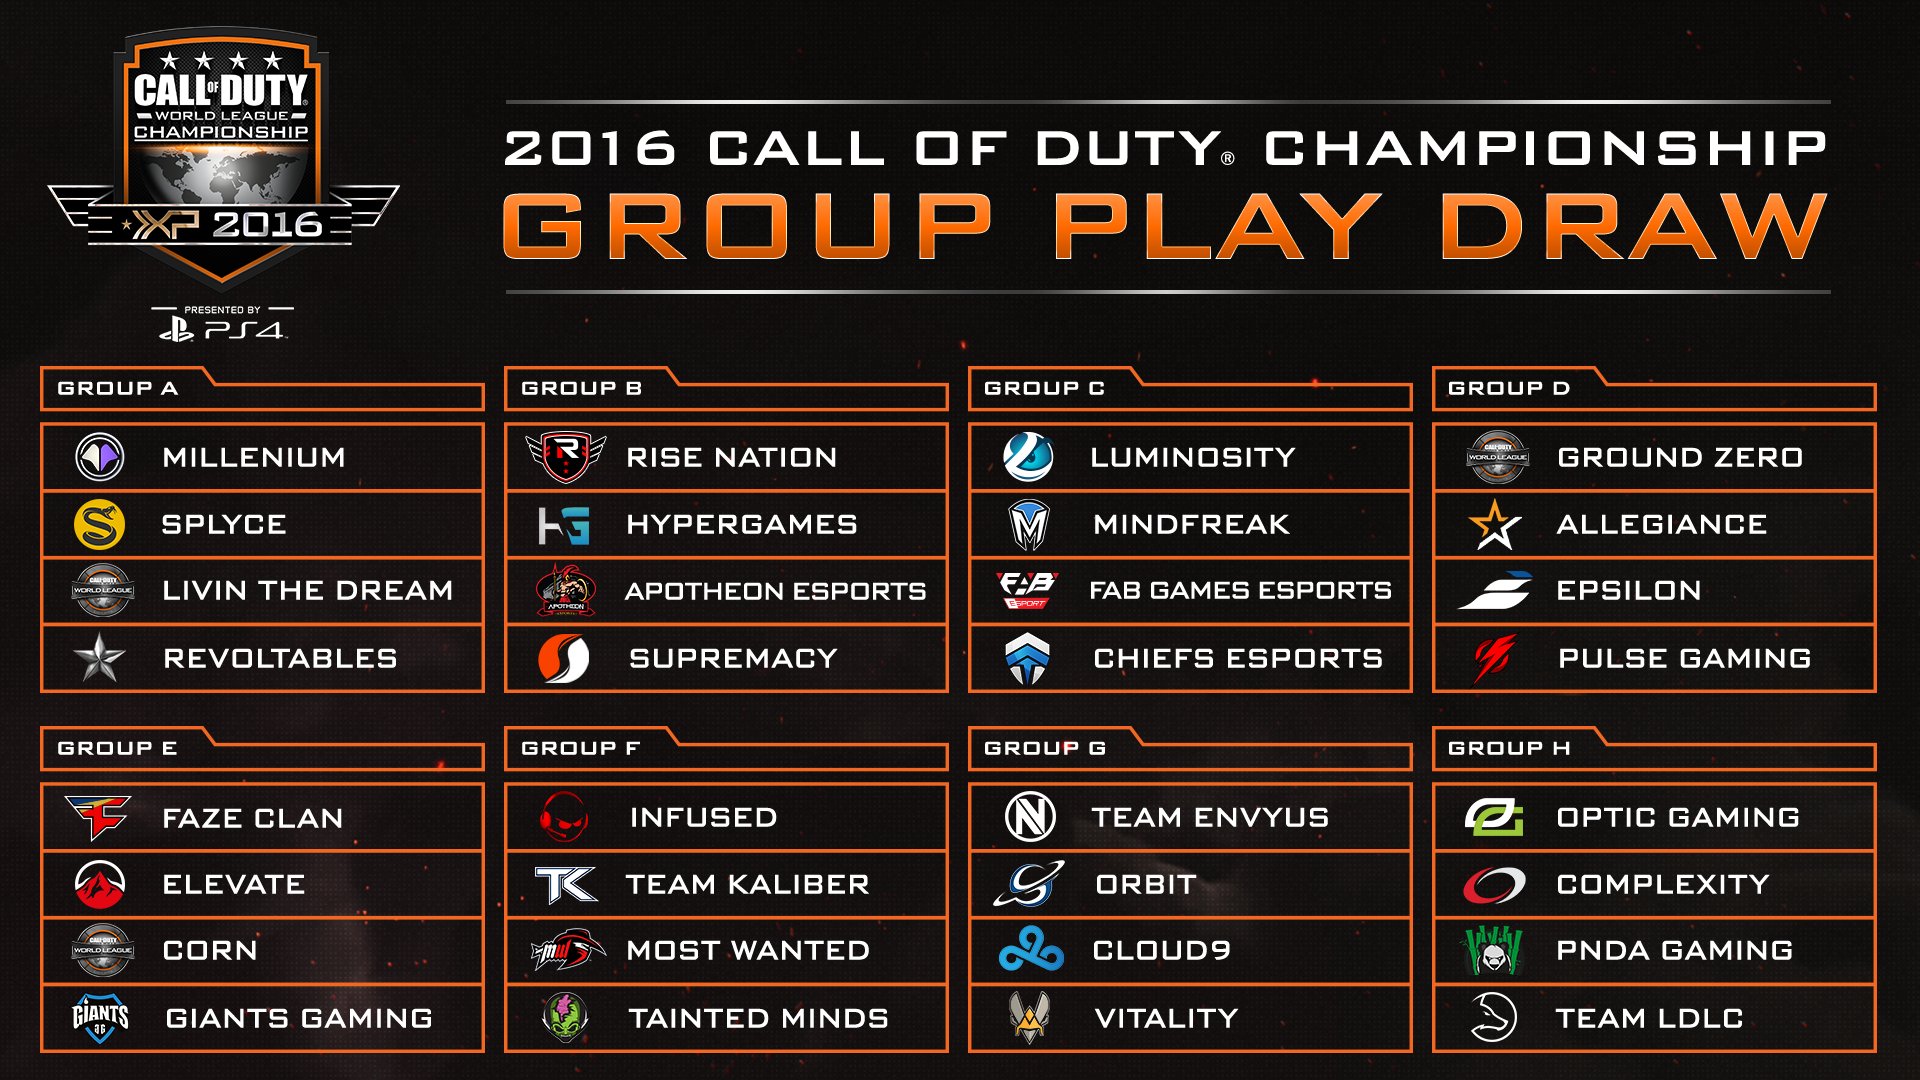 Call of Duty World League Championship groups